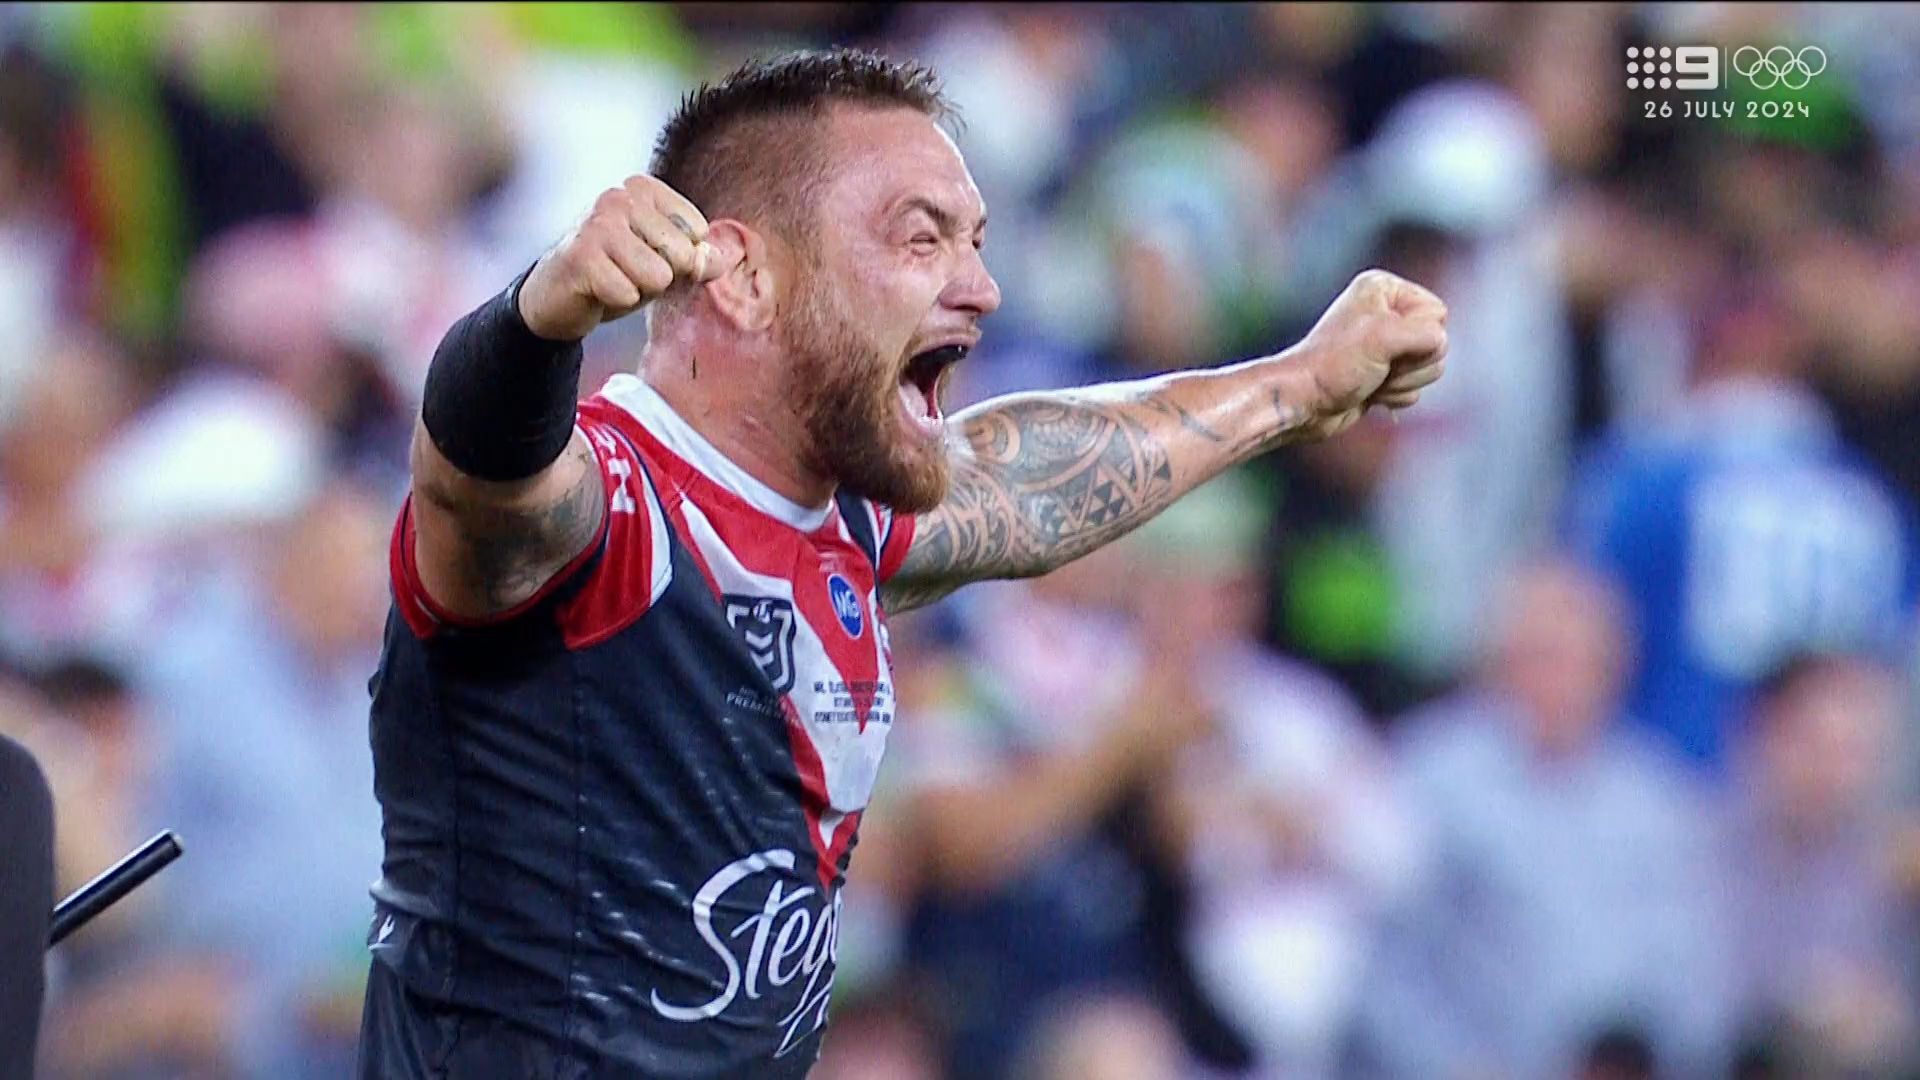 'Epitomises the club': Jared Waerea-Hargreaves honoured as Roosters prop reaches 300 games